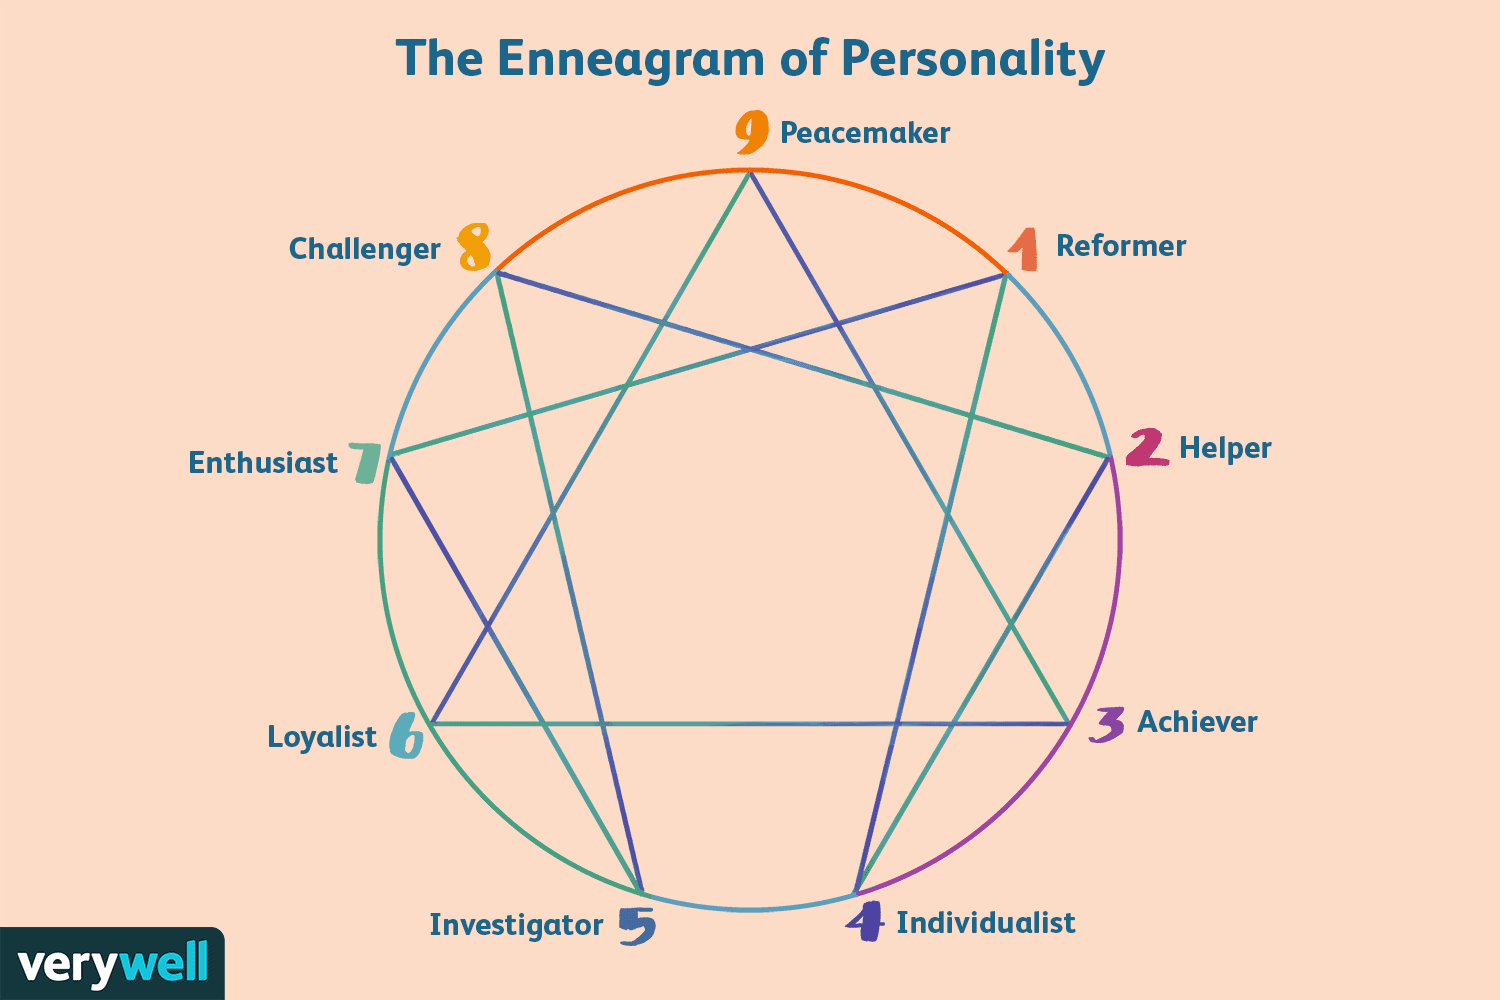 What is the Enneagram used for?